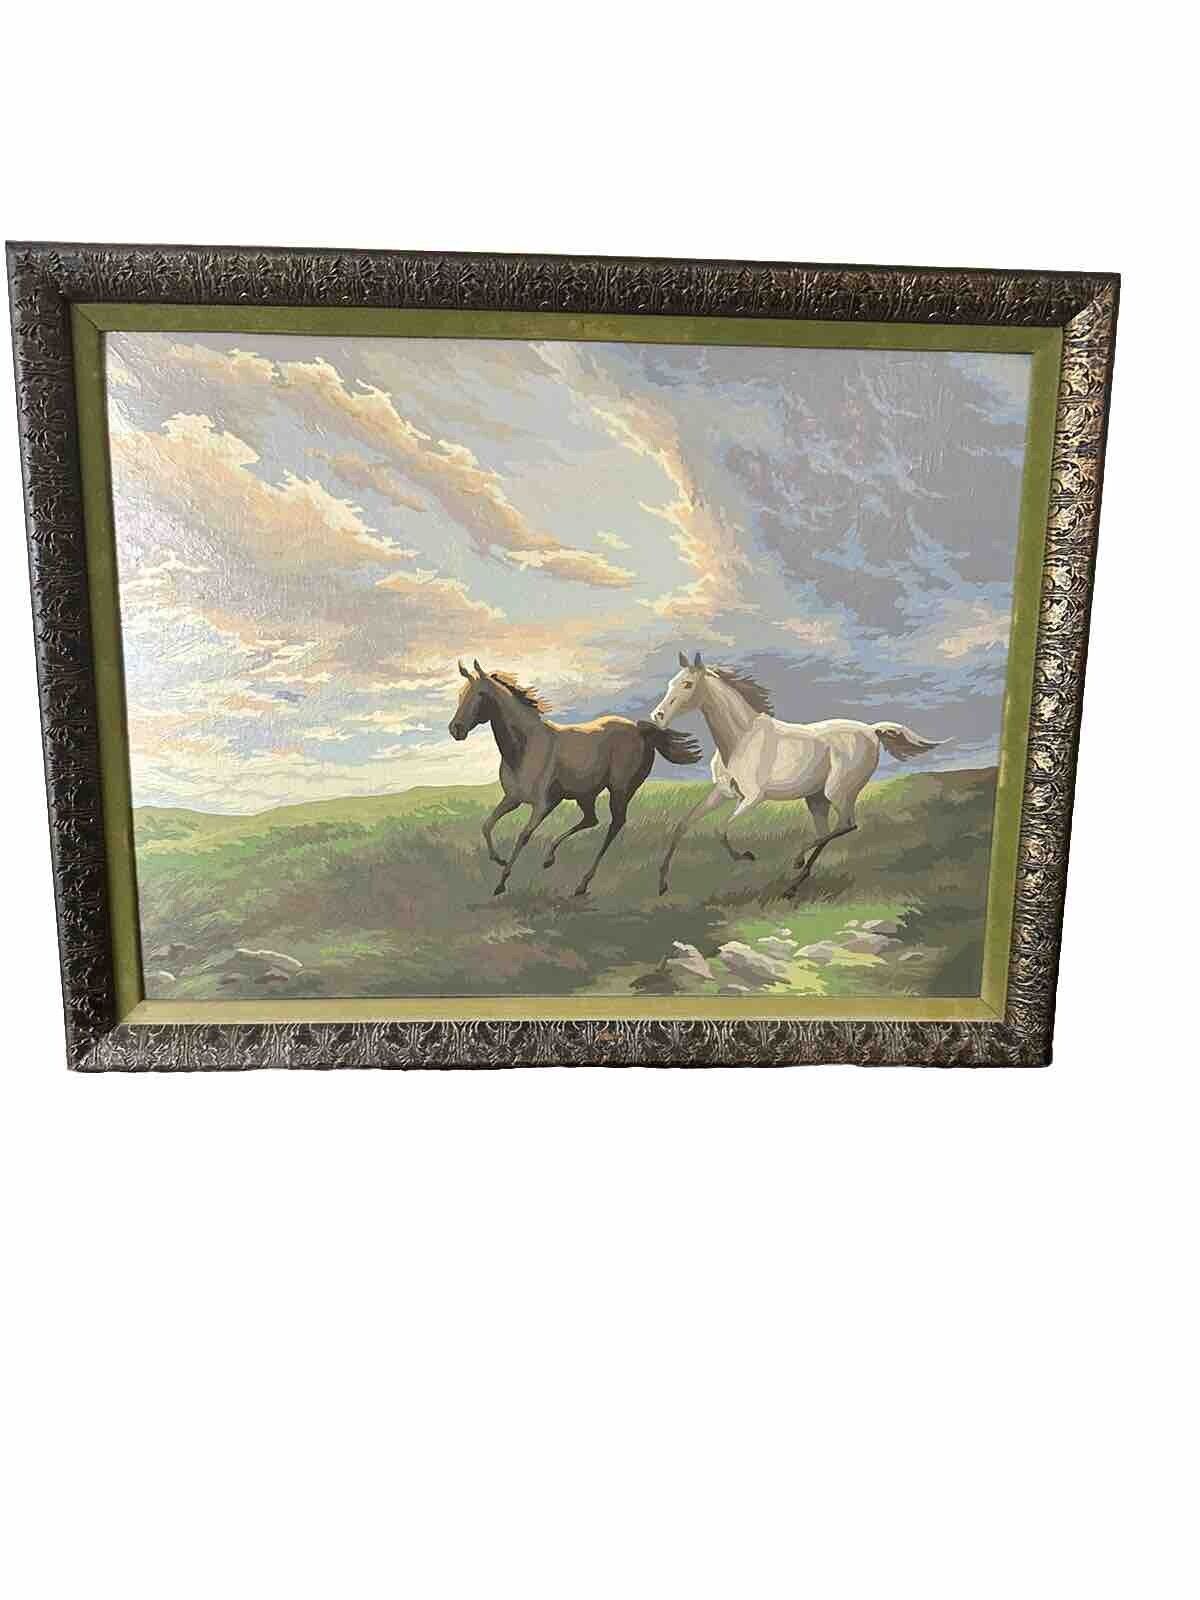 Vintage Paint by Number Running Wild Horses Art Painting Framed 18X24 Beautiful